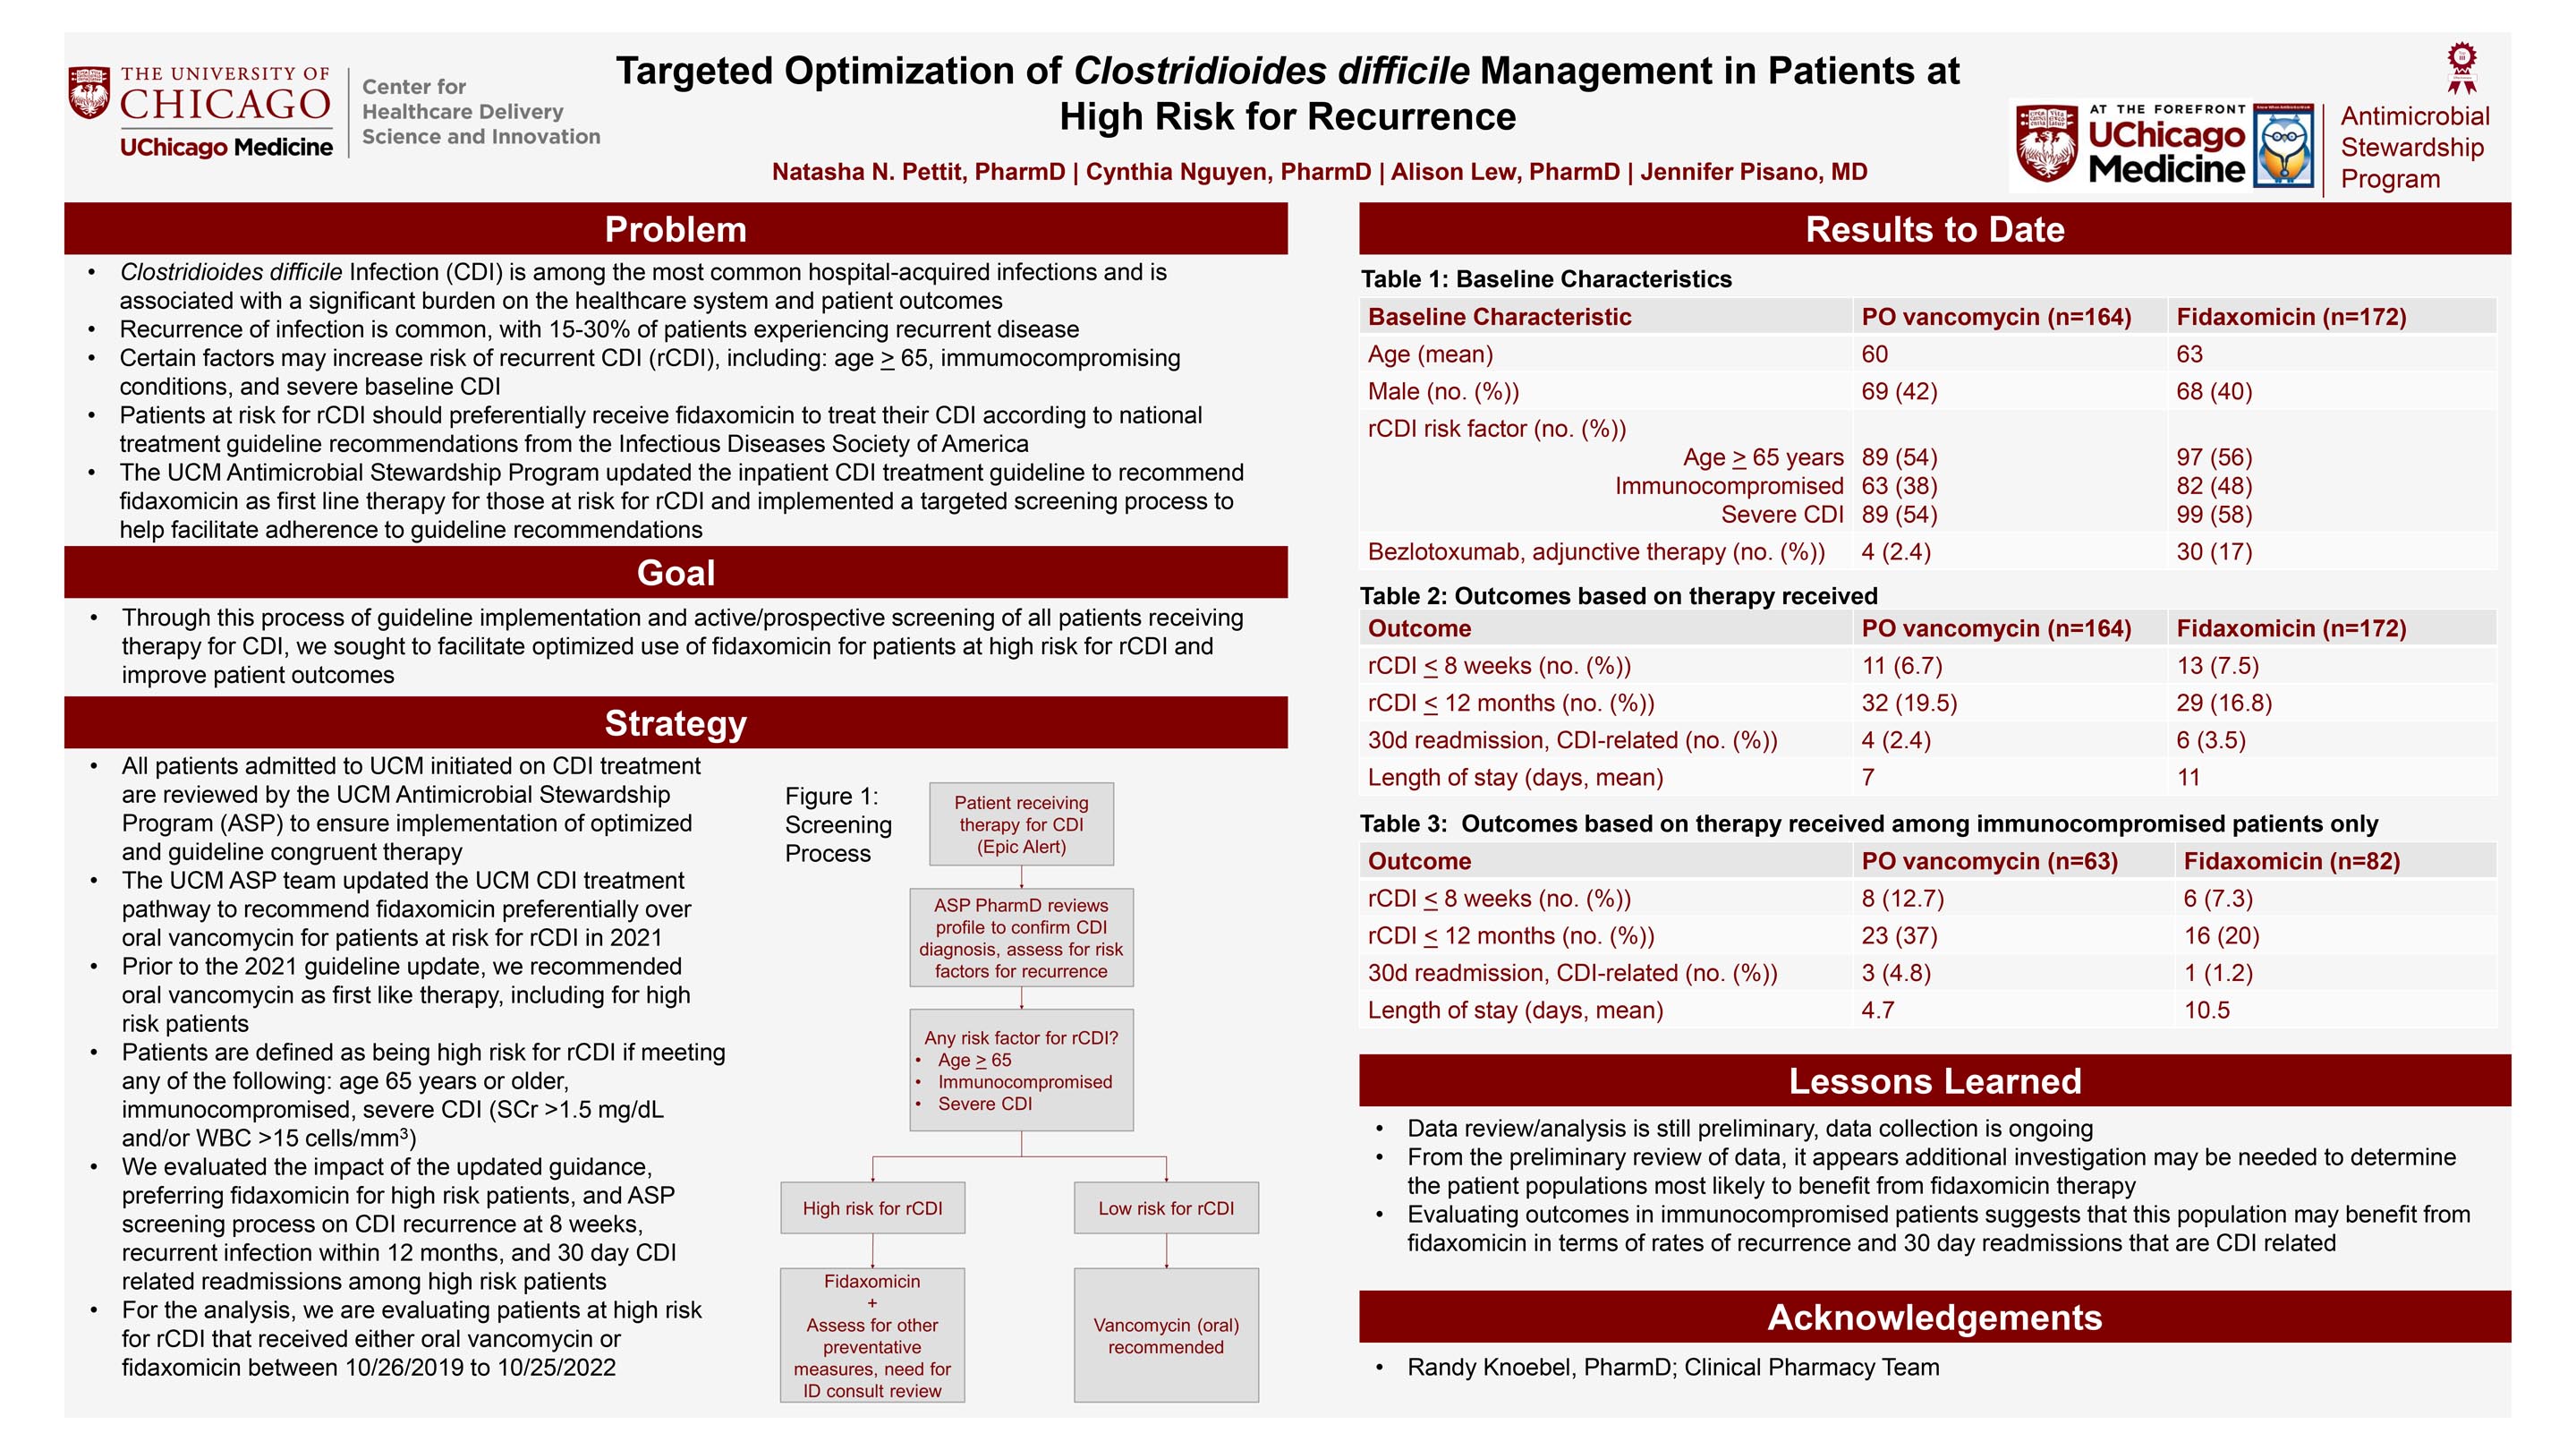 PETTIT_Targeted Optimization of Clostridioides difficile Management in Patients at High Risk for Recurrence